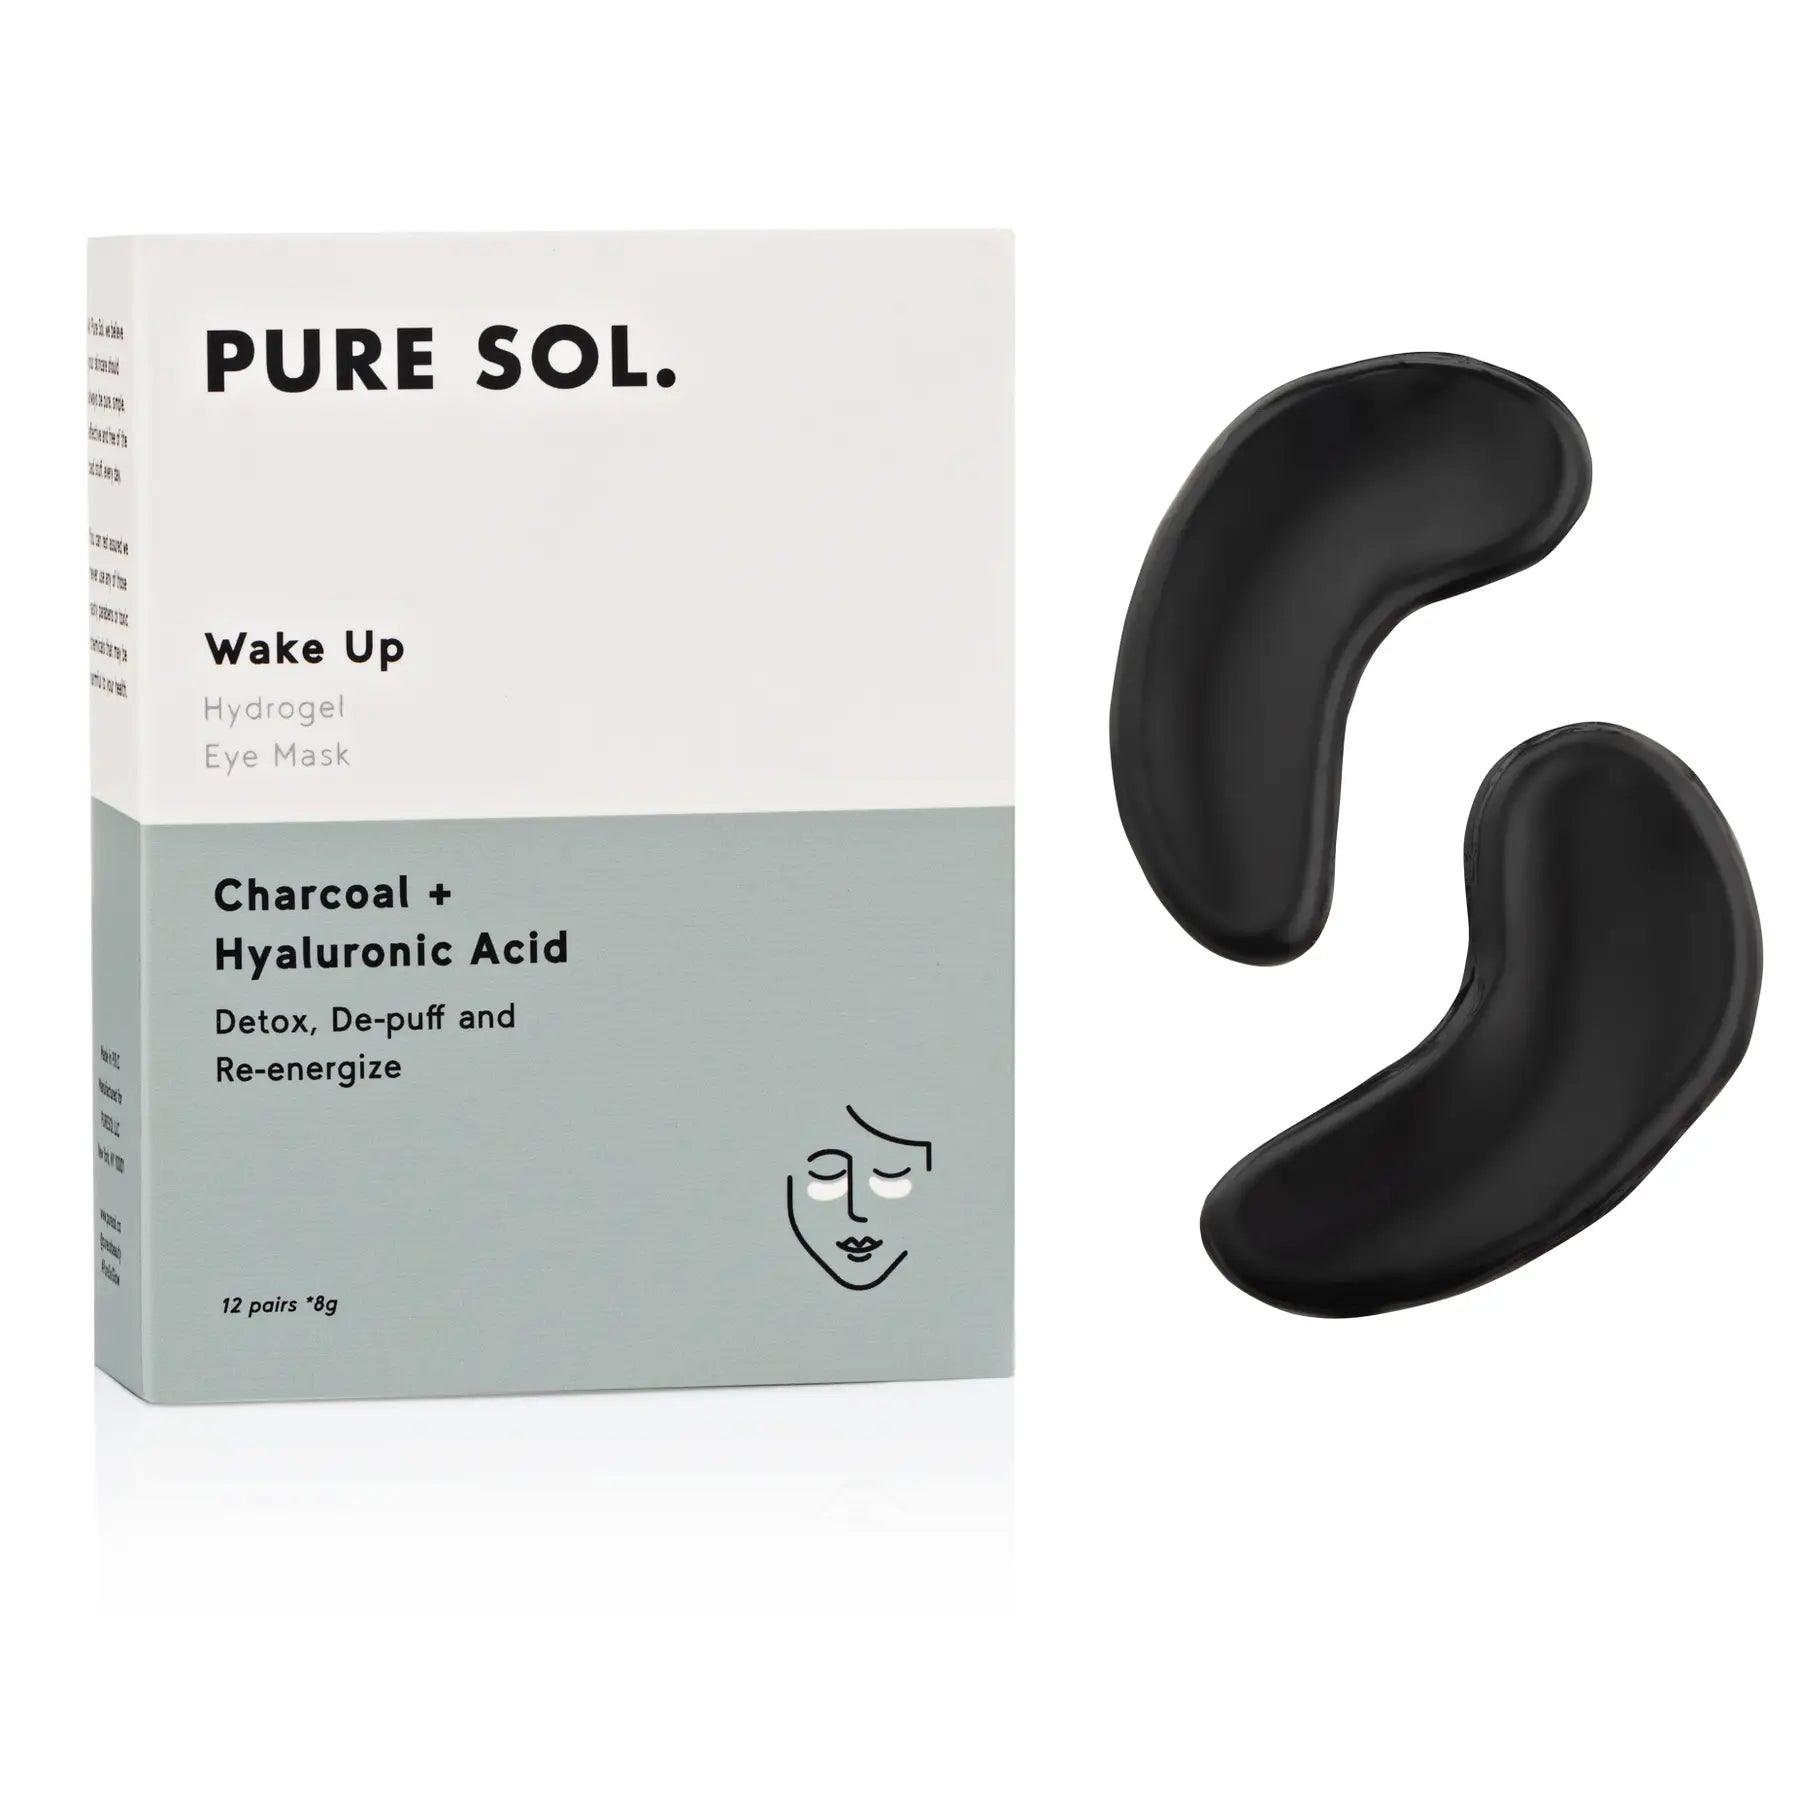 Wake Up Hydrogel Eye Patch Charcoal + Hyaluronic Acid - Sprig Flower Co